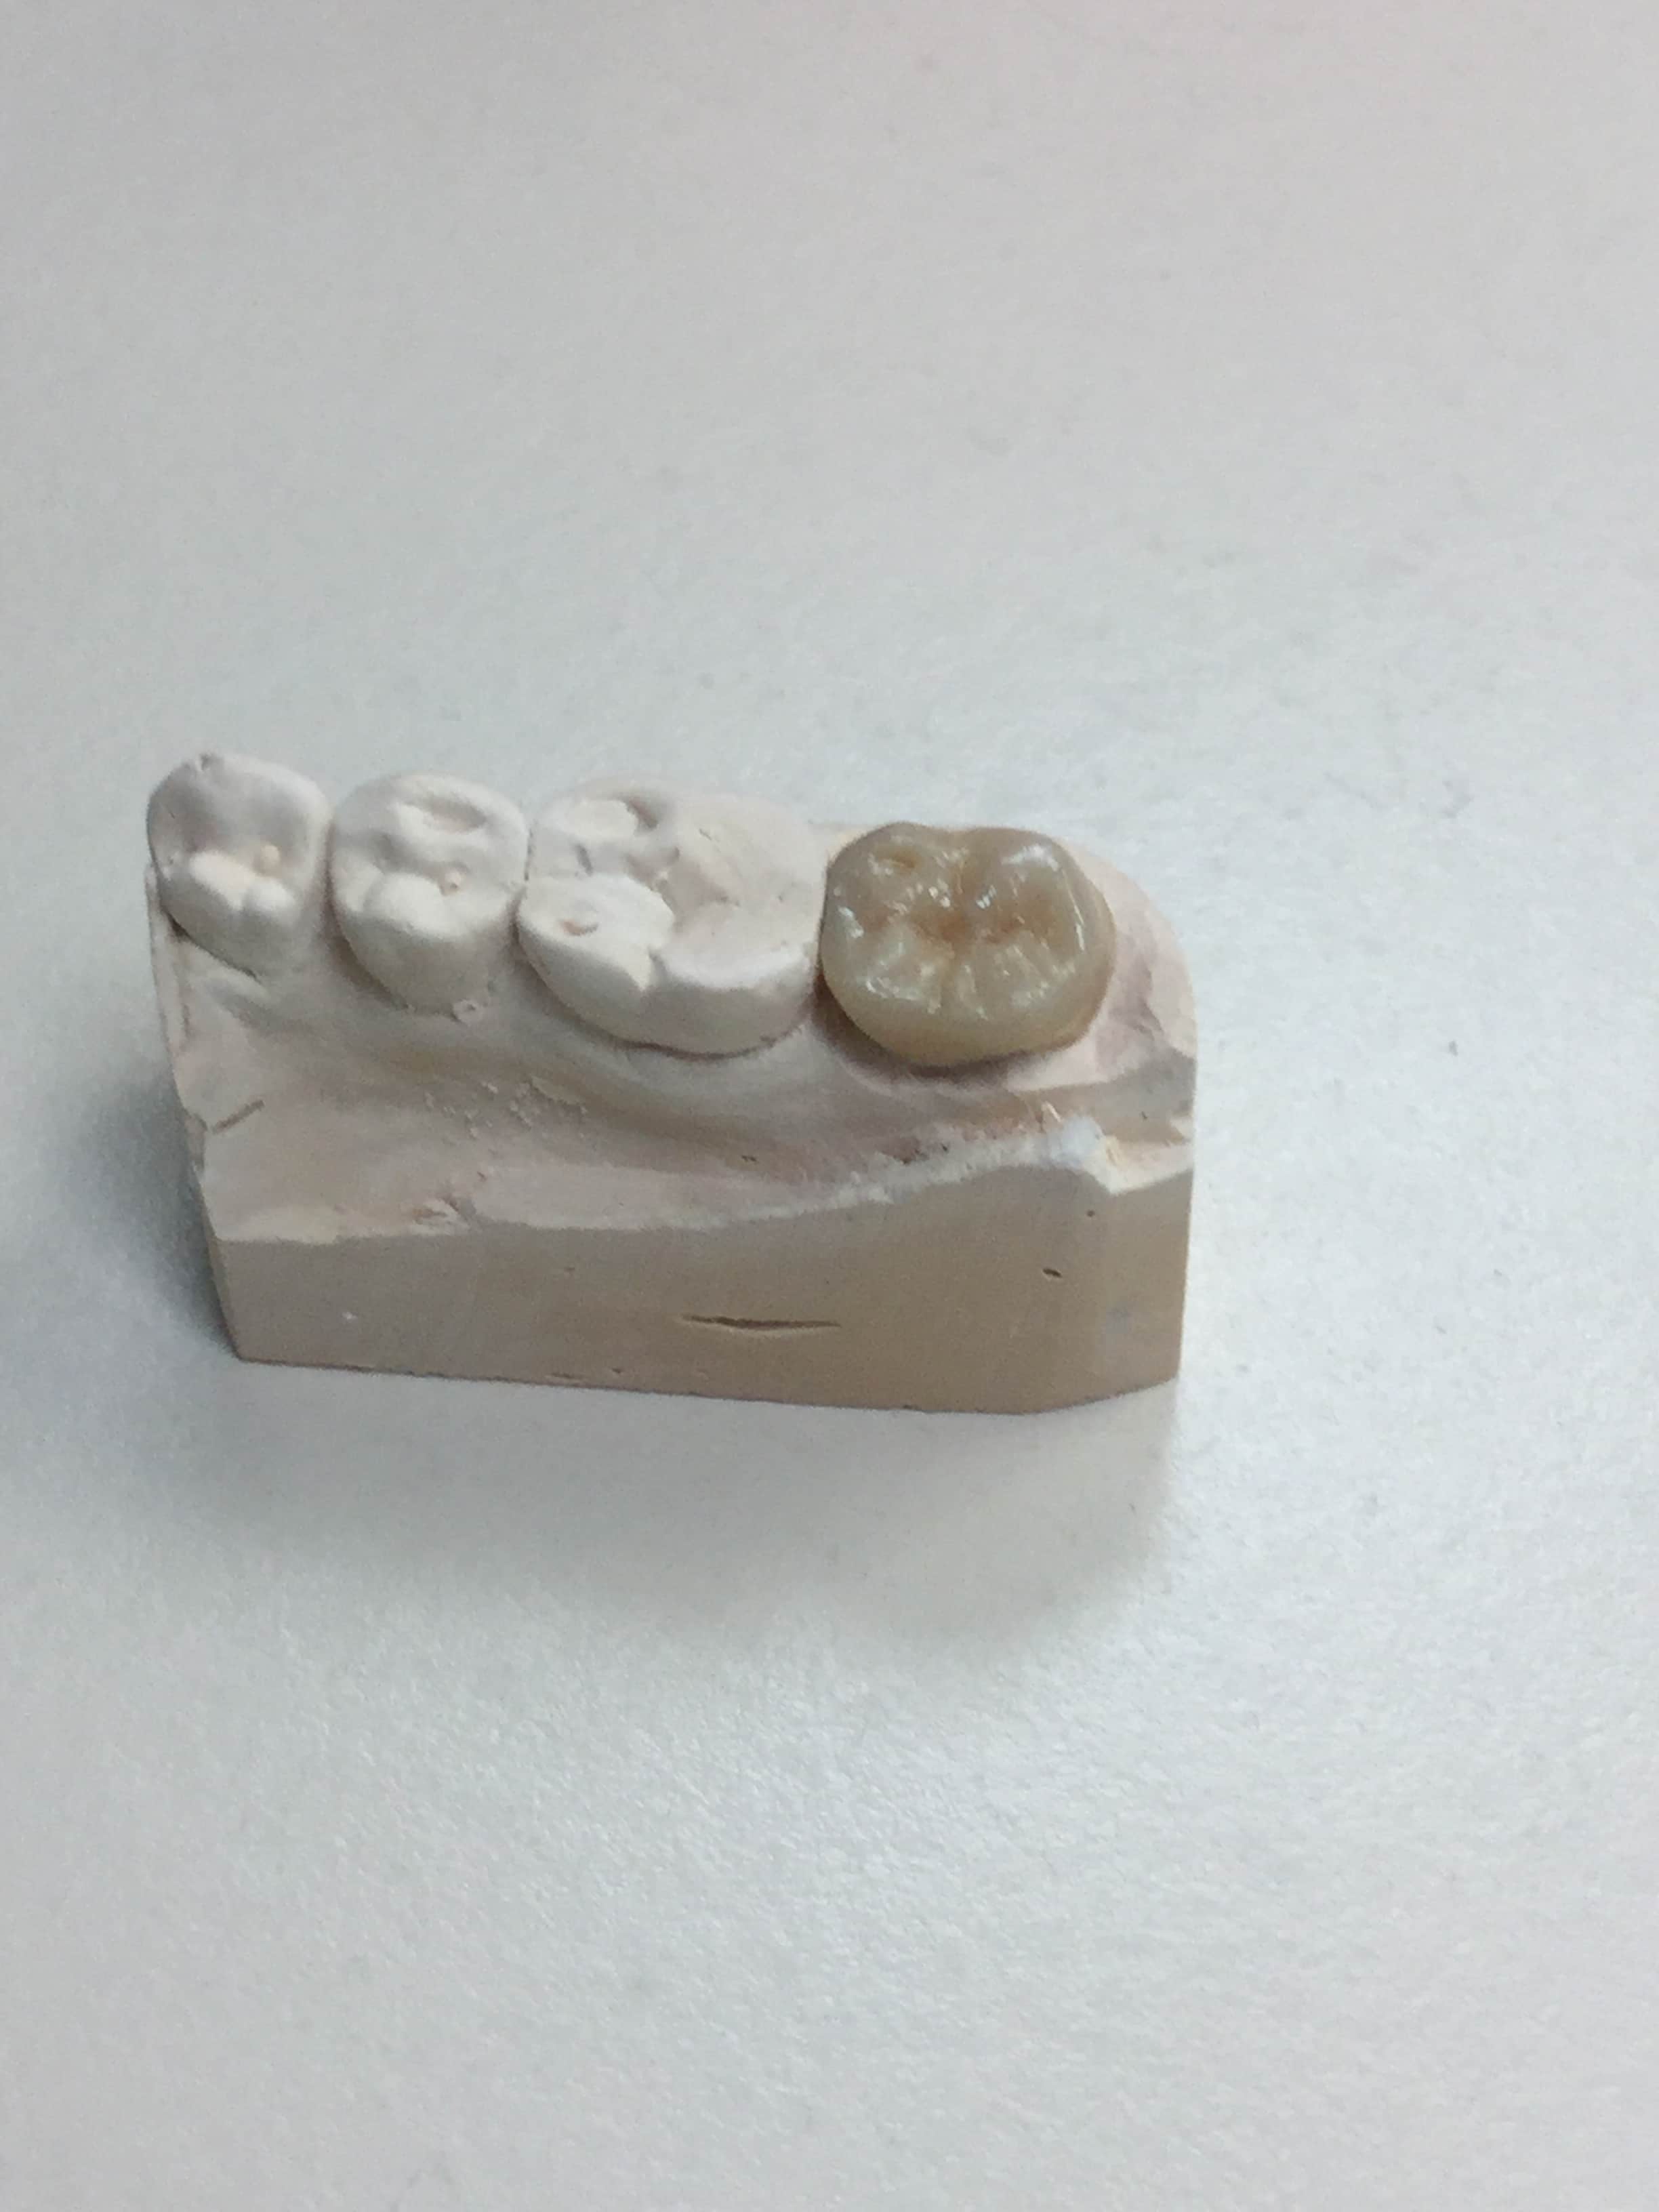 A crown covers the natural tooth.